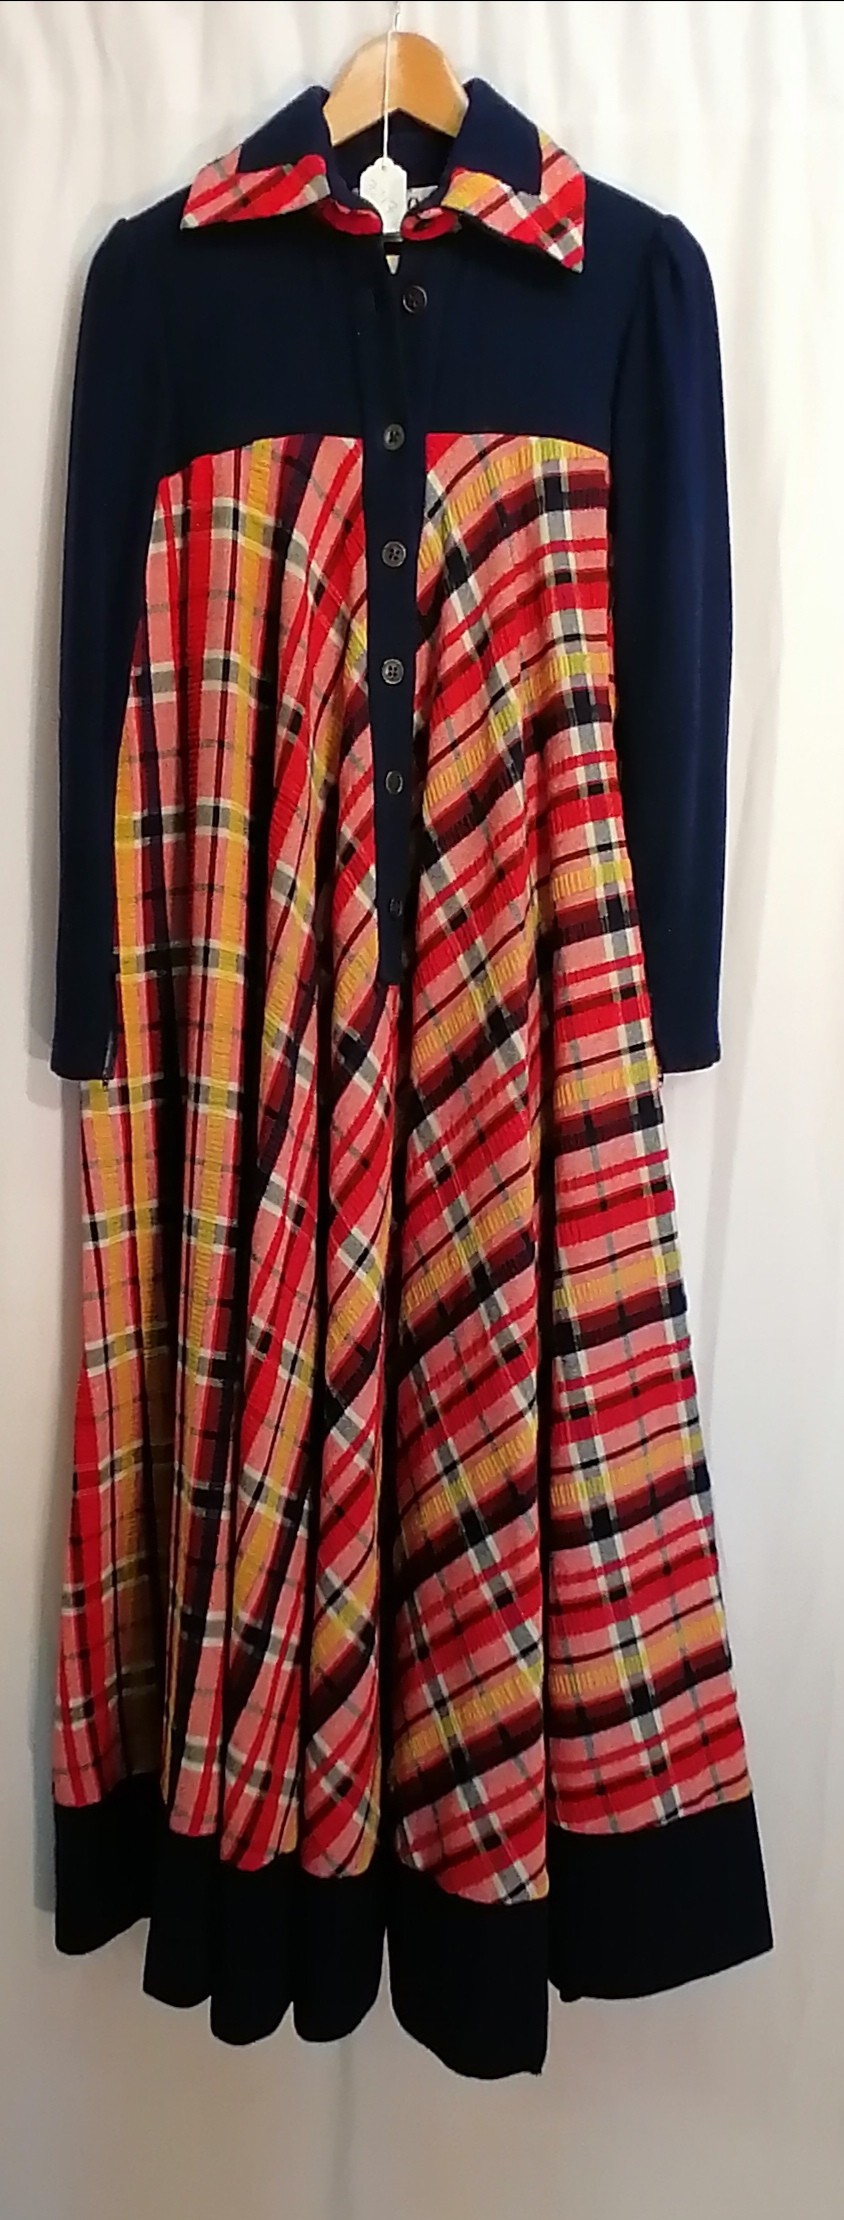 1660's/70's plaid wool and cotton maxi dress by Jean Varon. In good used condition